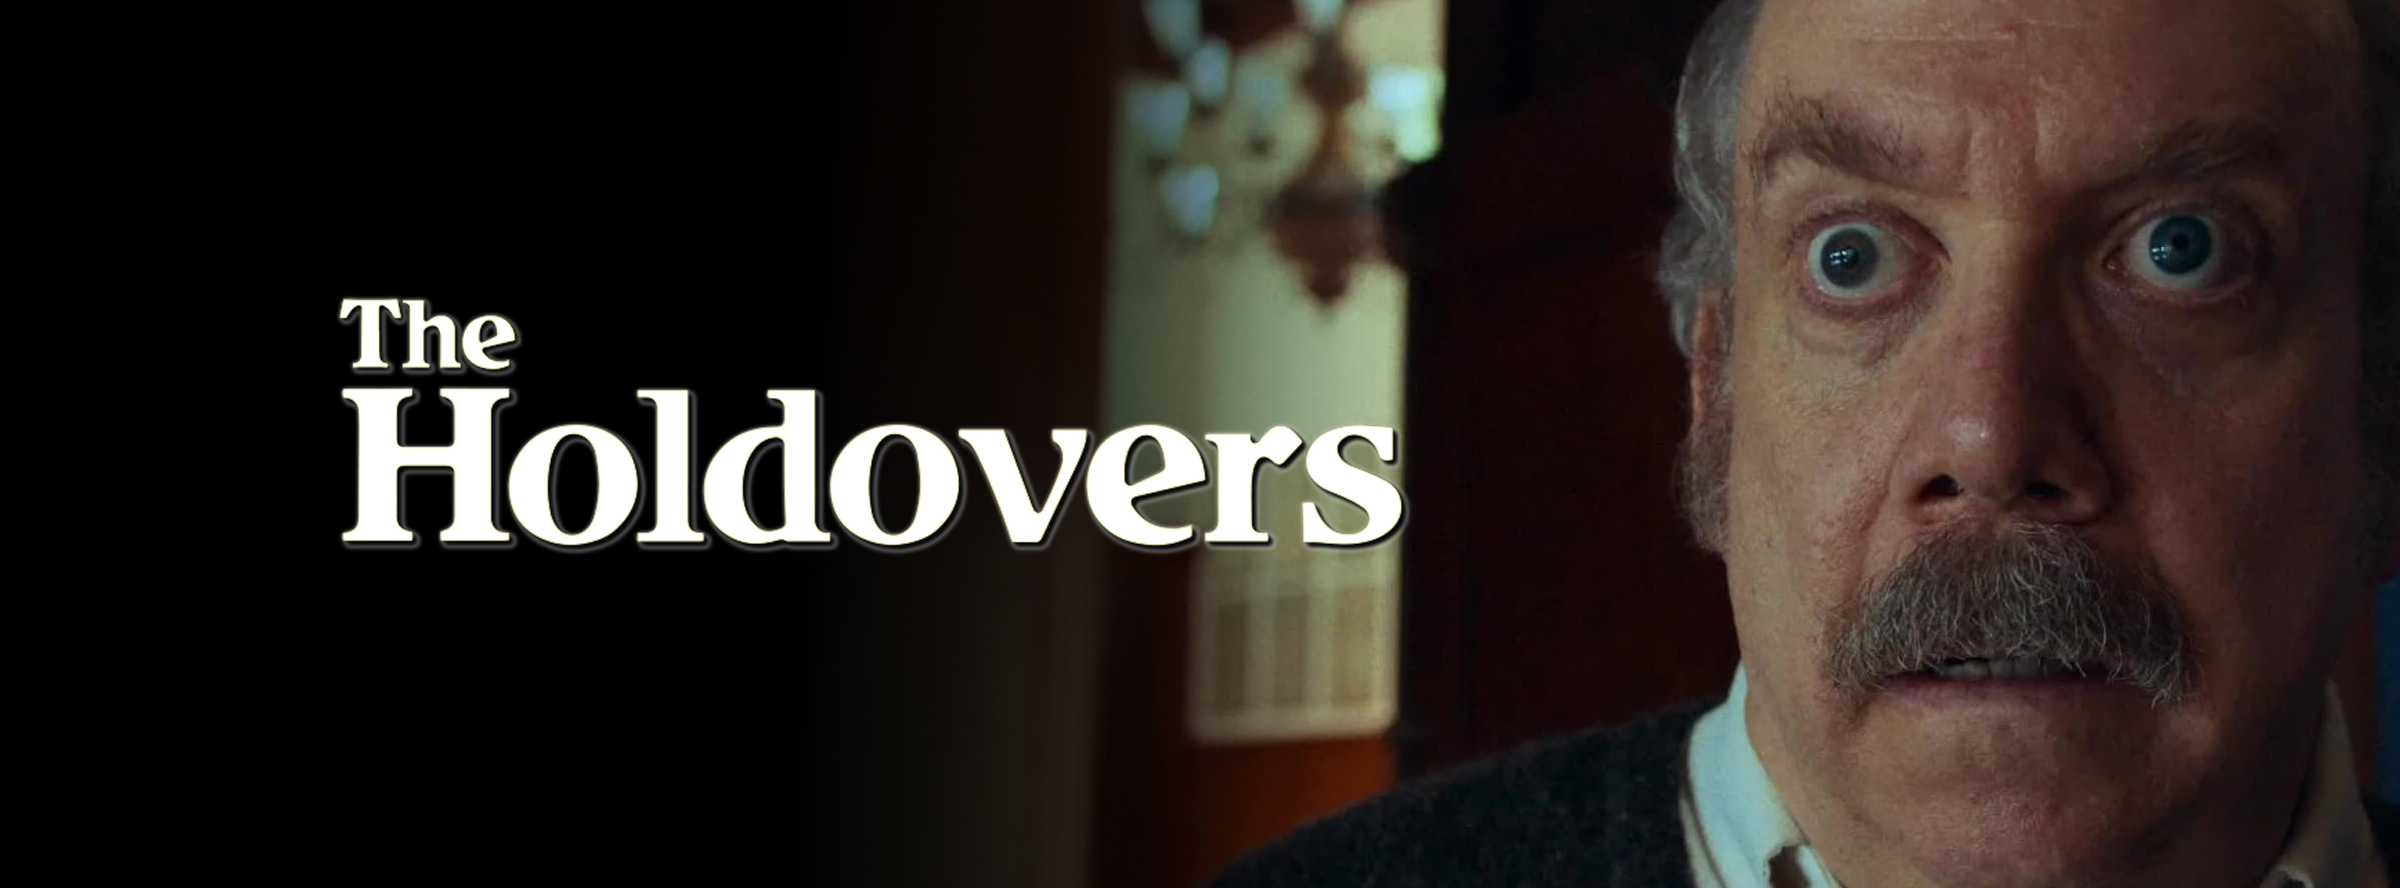 Slider Image for Holdovers, The                                                             